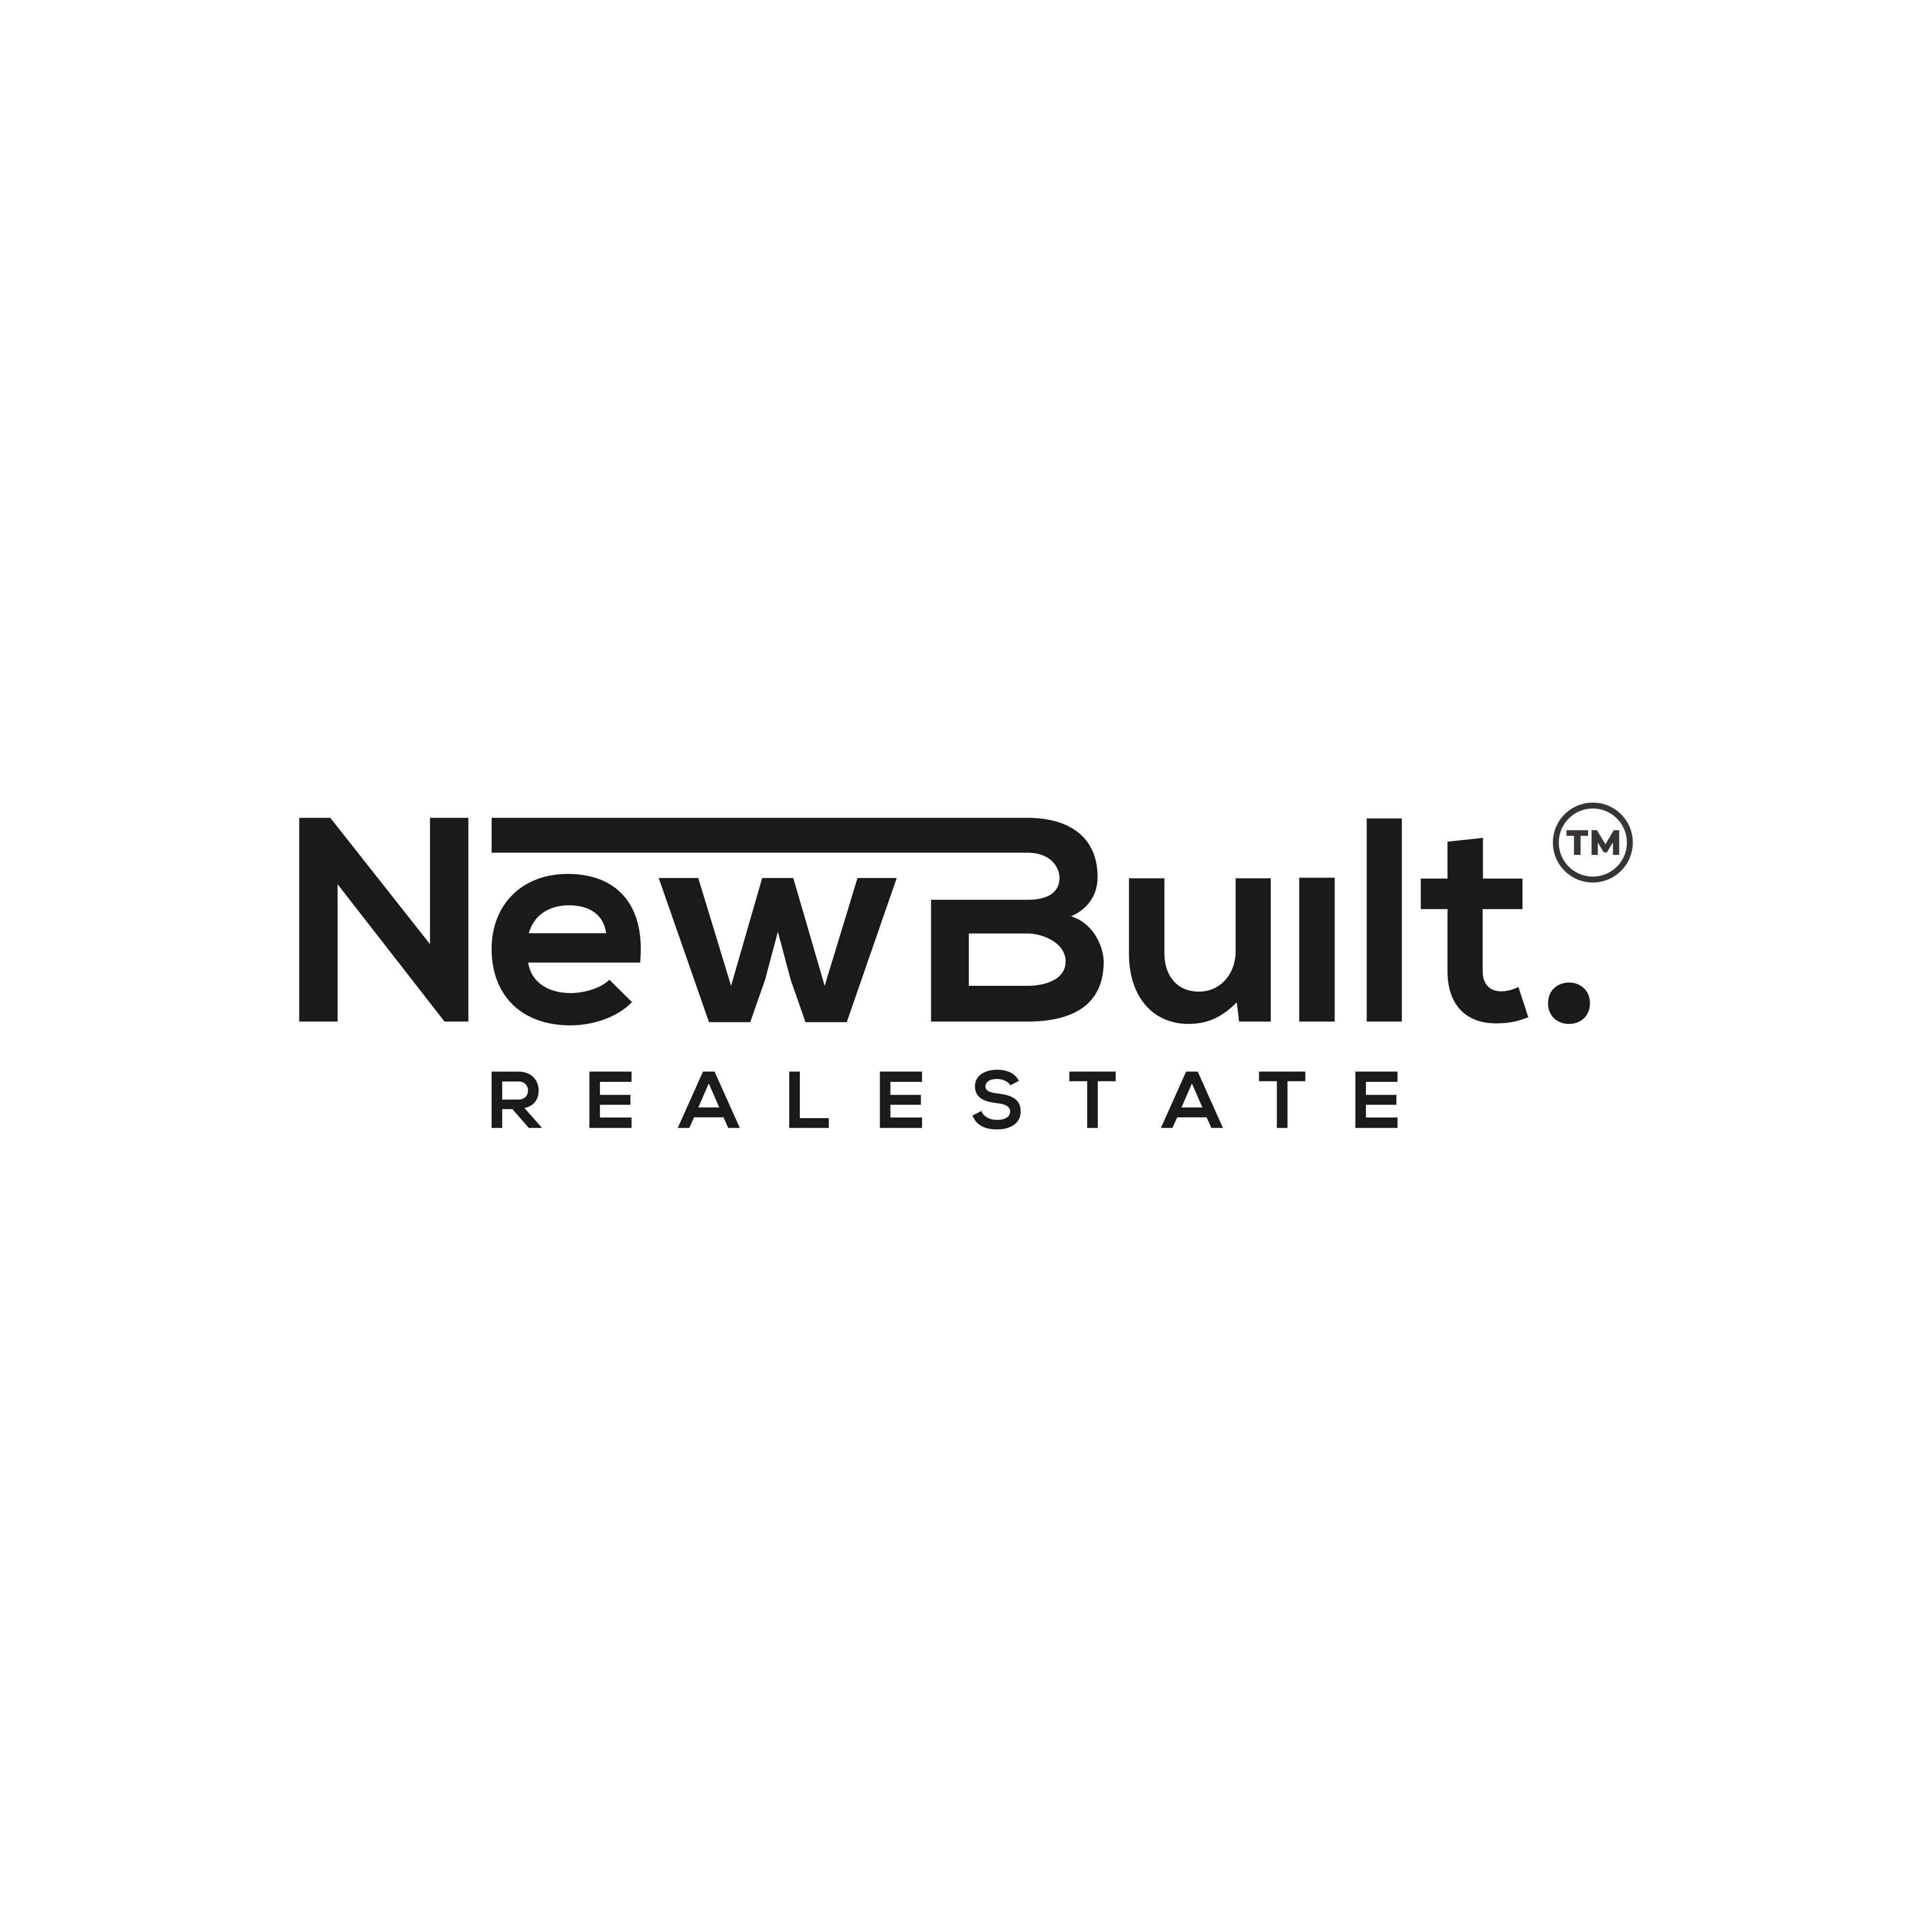 NewBuilt.RealEstate™ Realtors Simplify Finding the Perfect Builder or New-Built Home